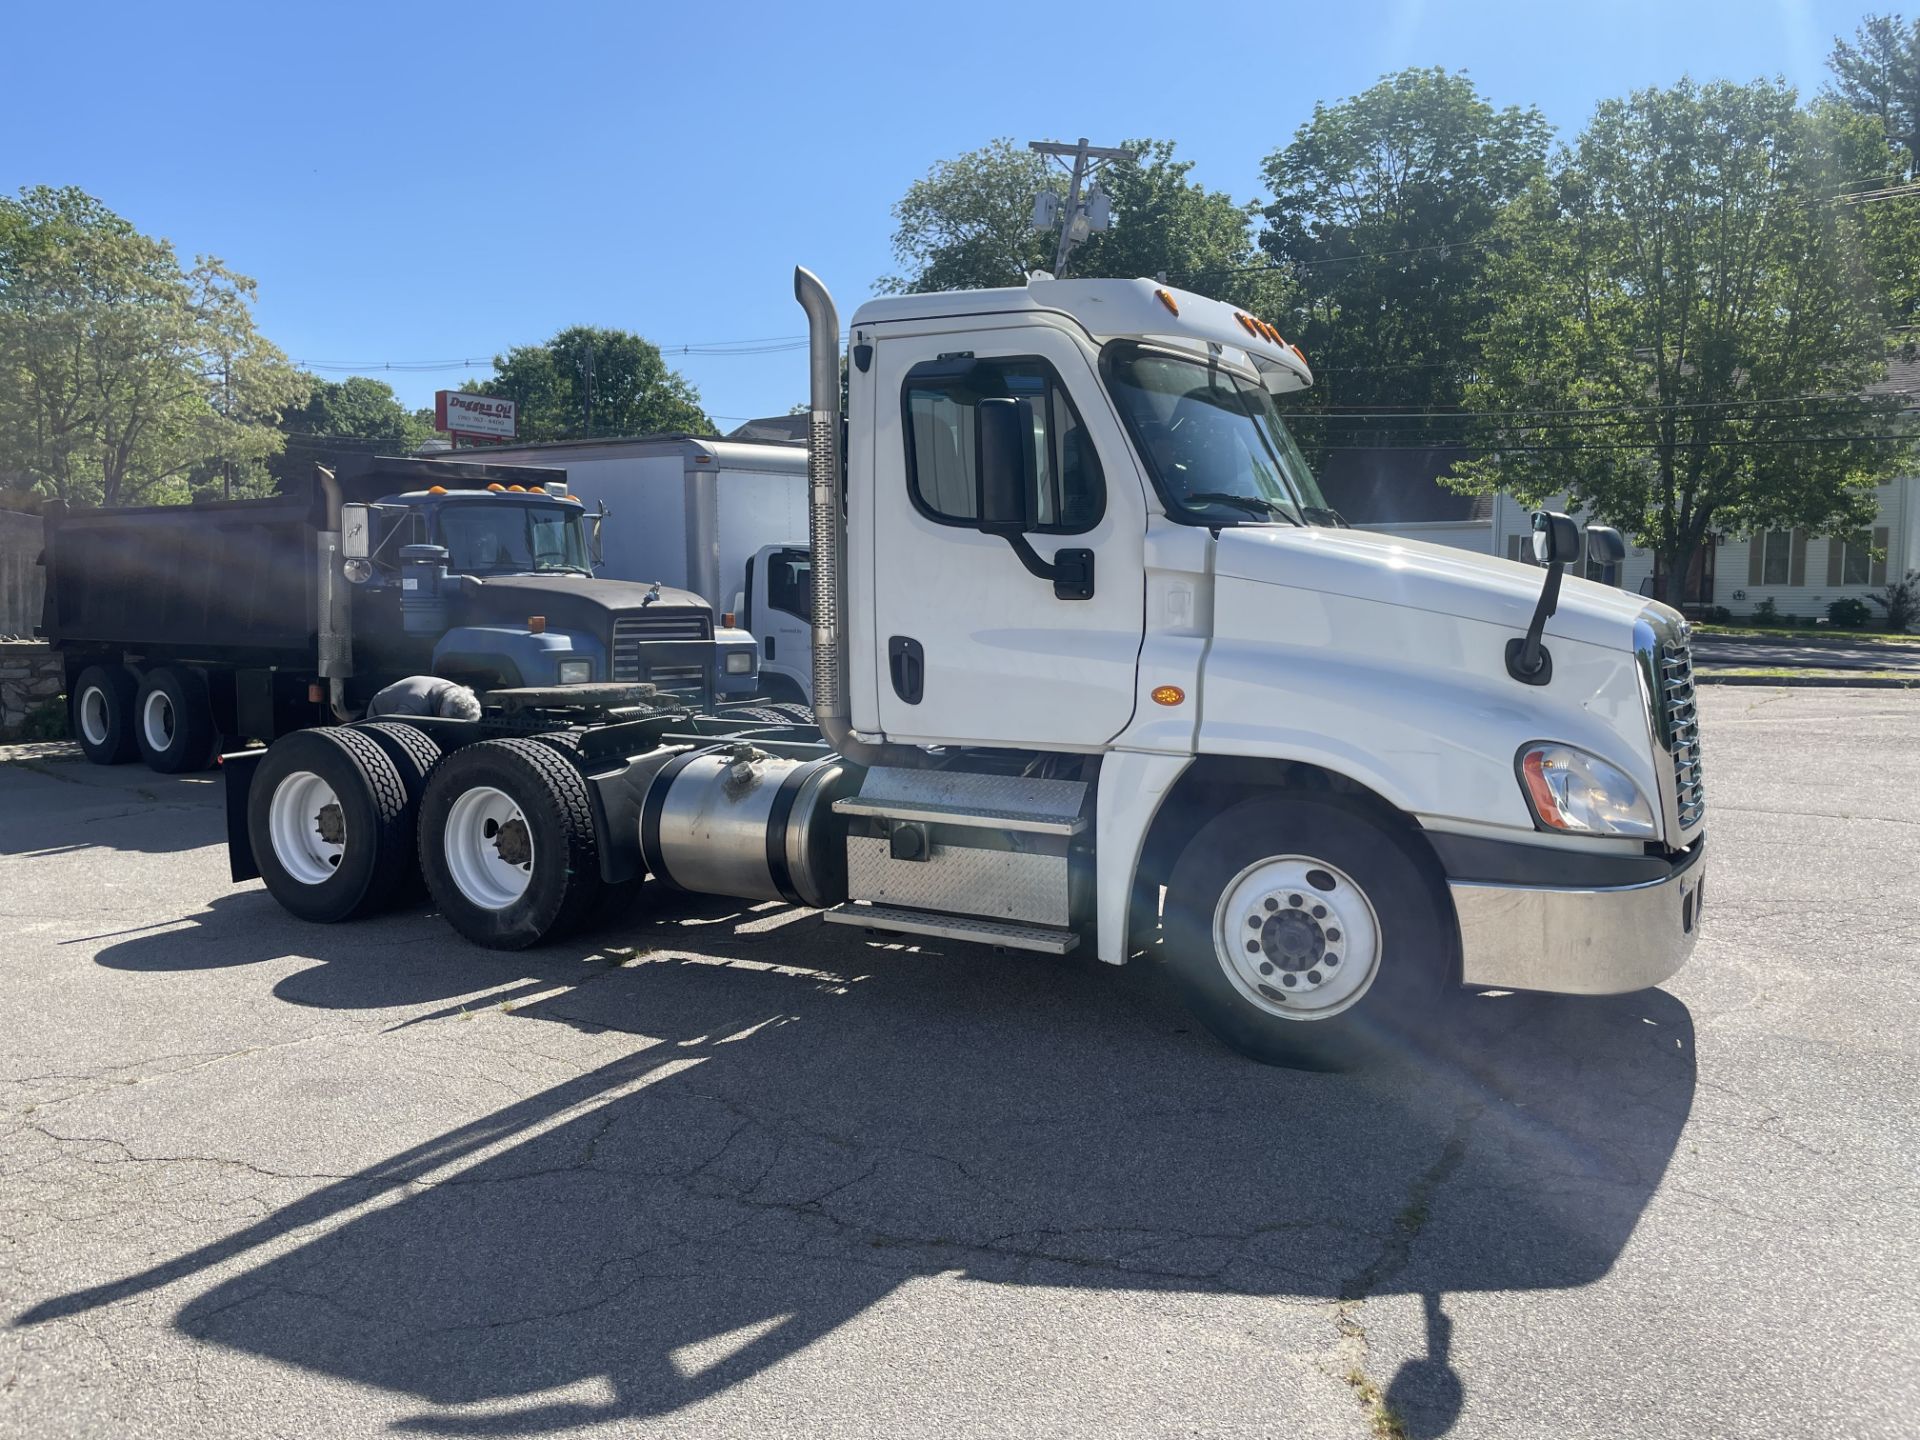 2017 Freightliner Cascadia, 10-Wheel, Tandem Axle Daycab Tractor, iSX i5 Cummins 450HP Motor, Auto - Image 3 of 13